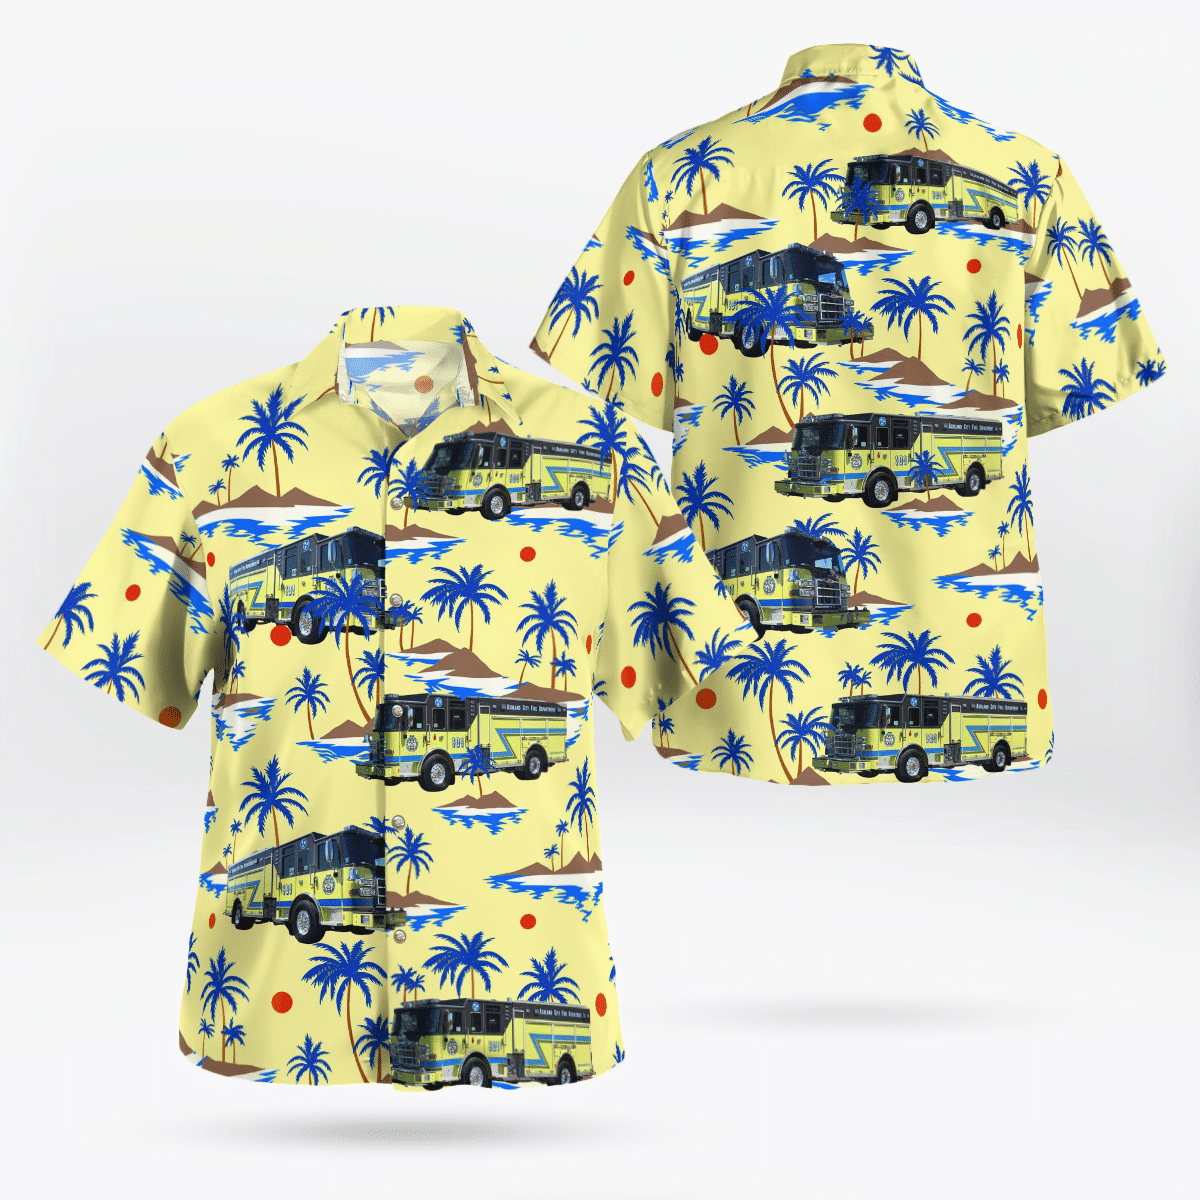 Shop now to find the perfect Hawaii Shirt for your hobby 2